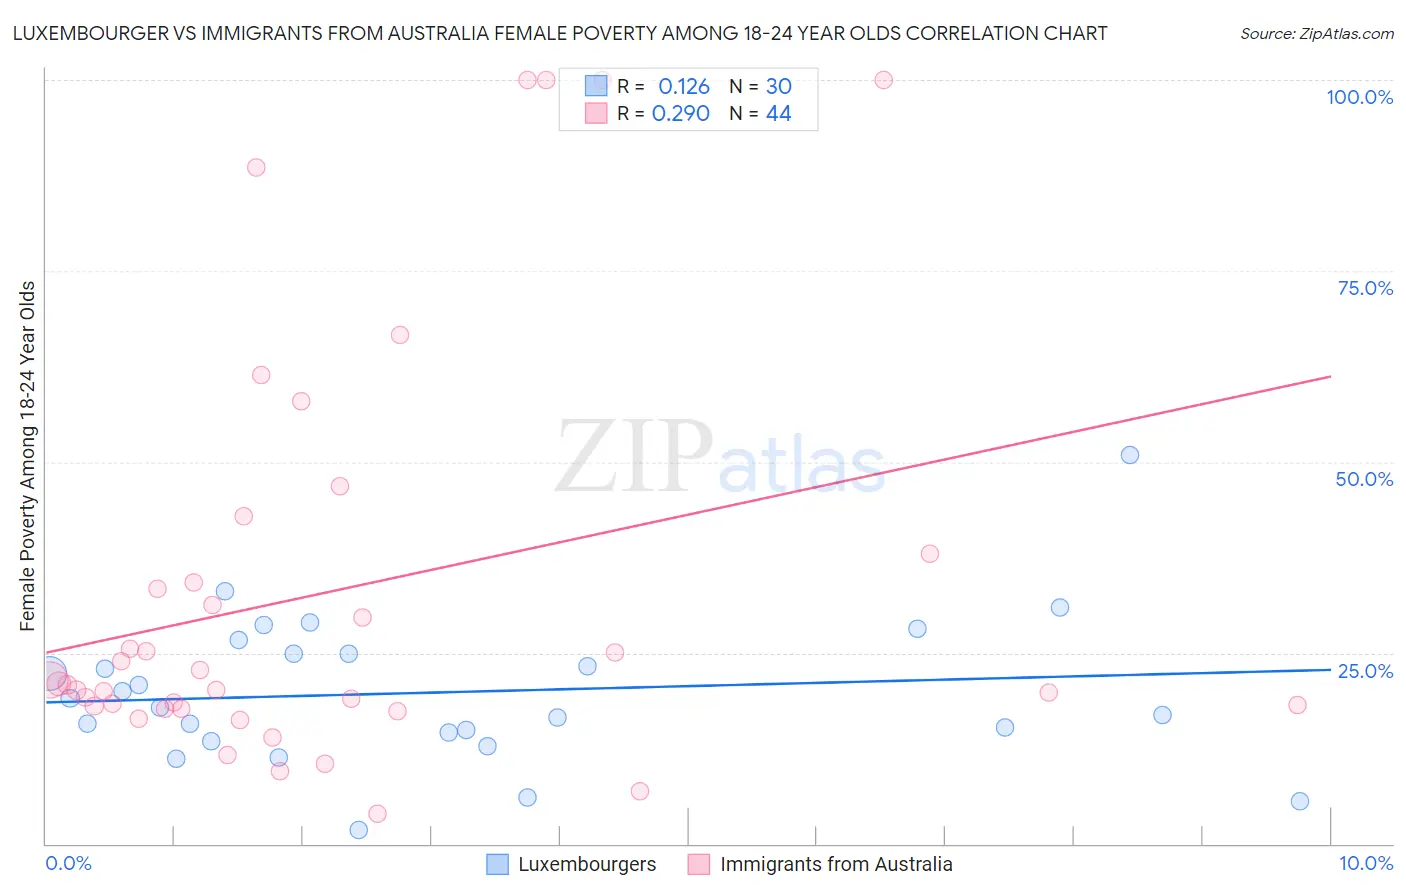 Luxembourger vs Immigrants from Australia Female Poverty Among 18-24 Year Olds